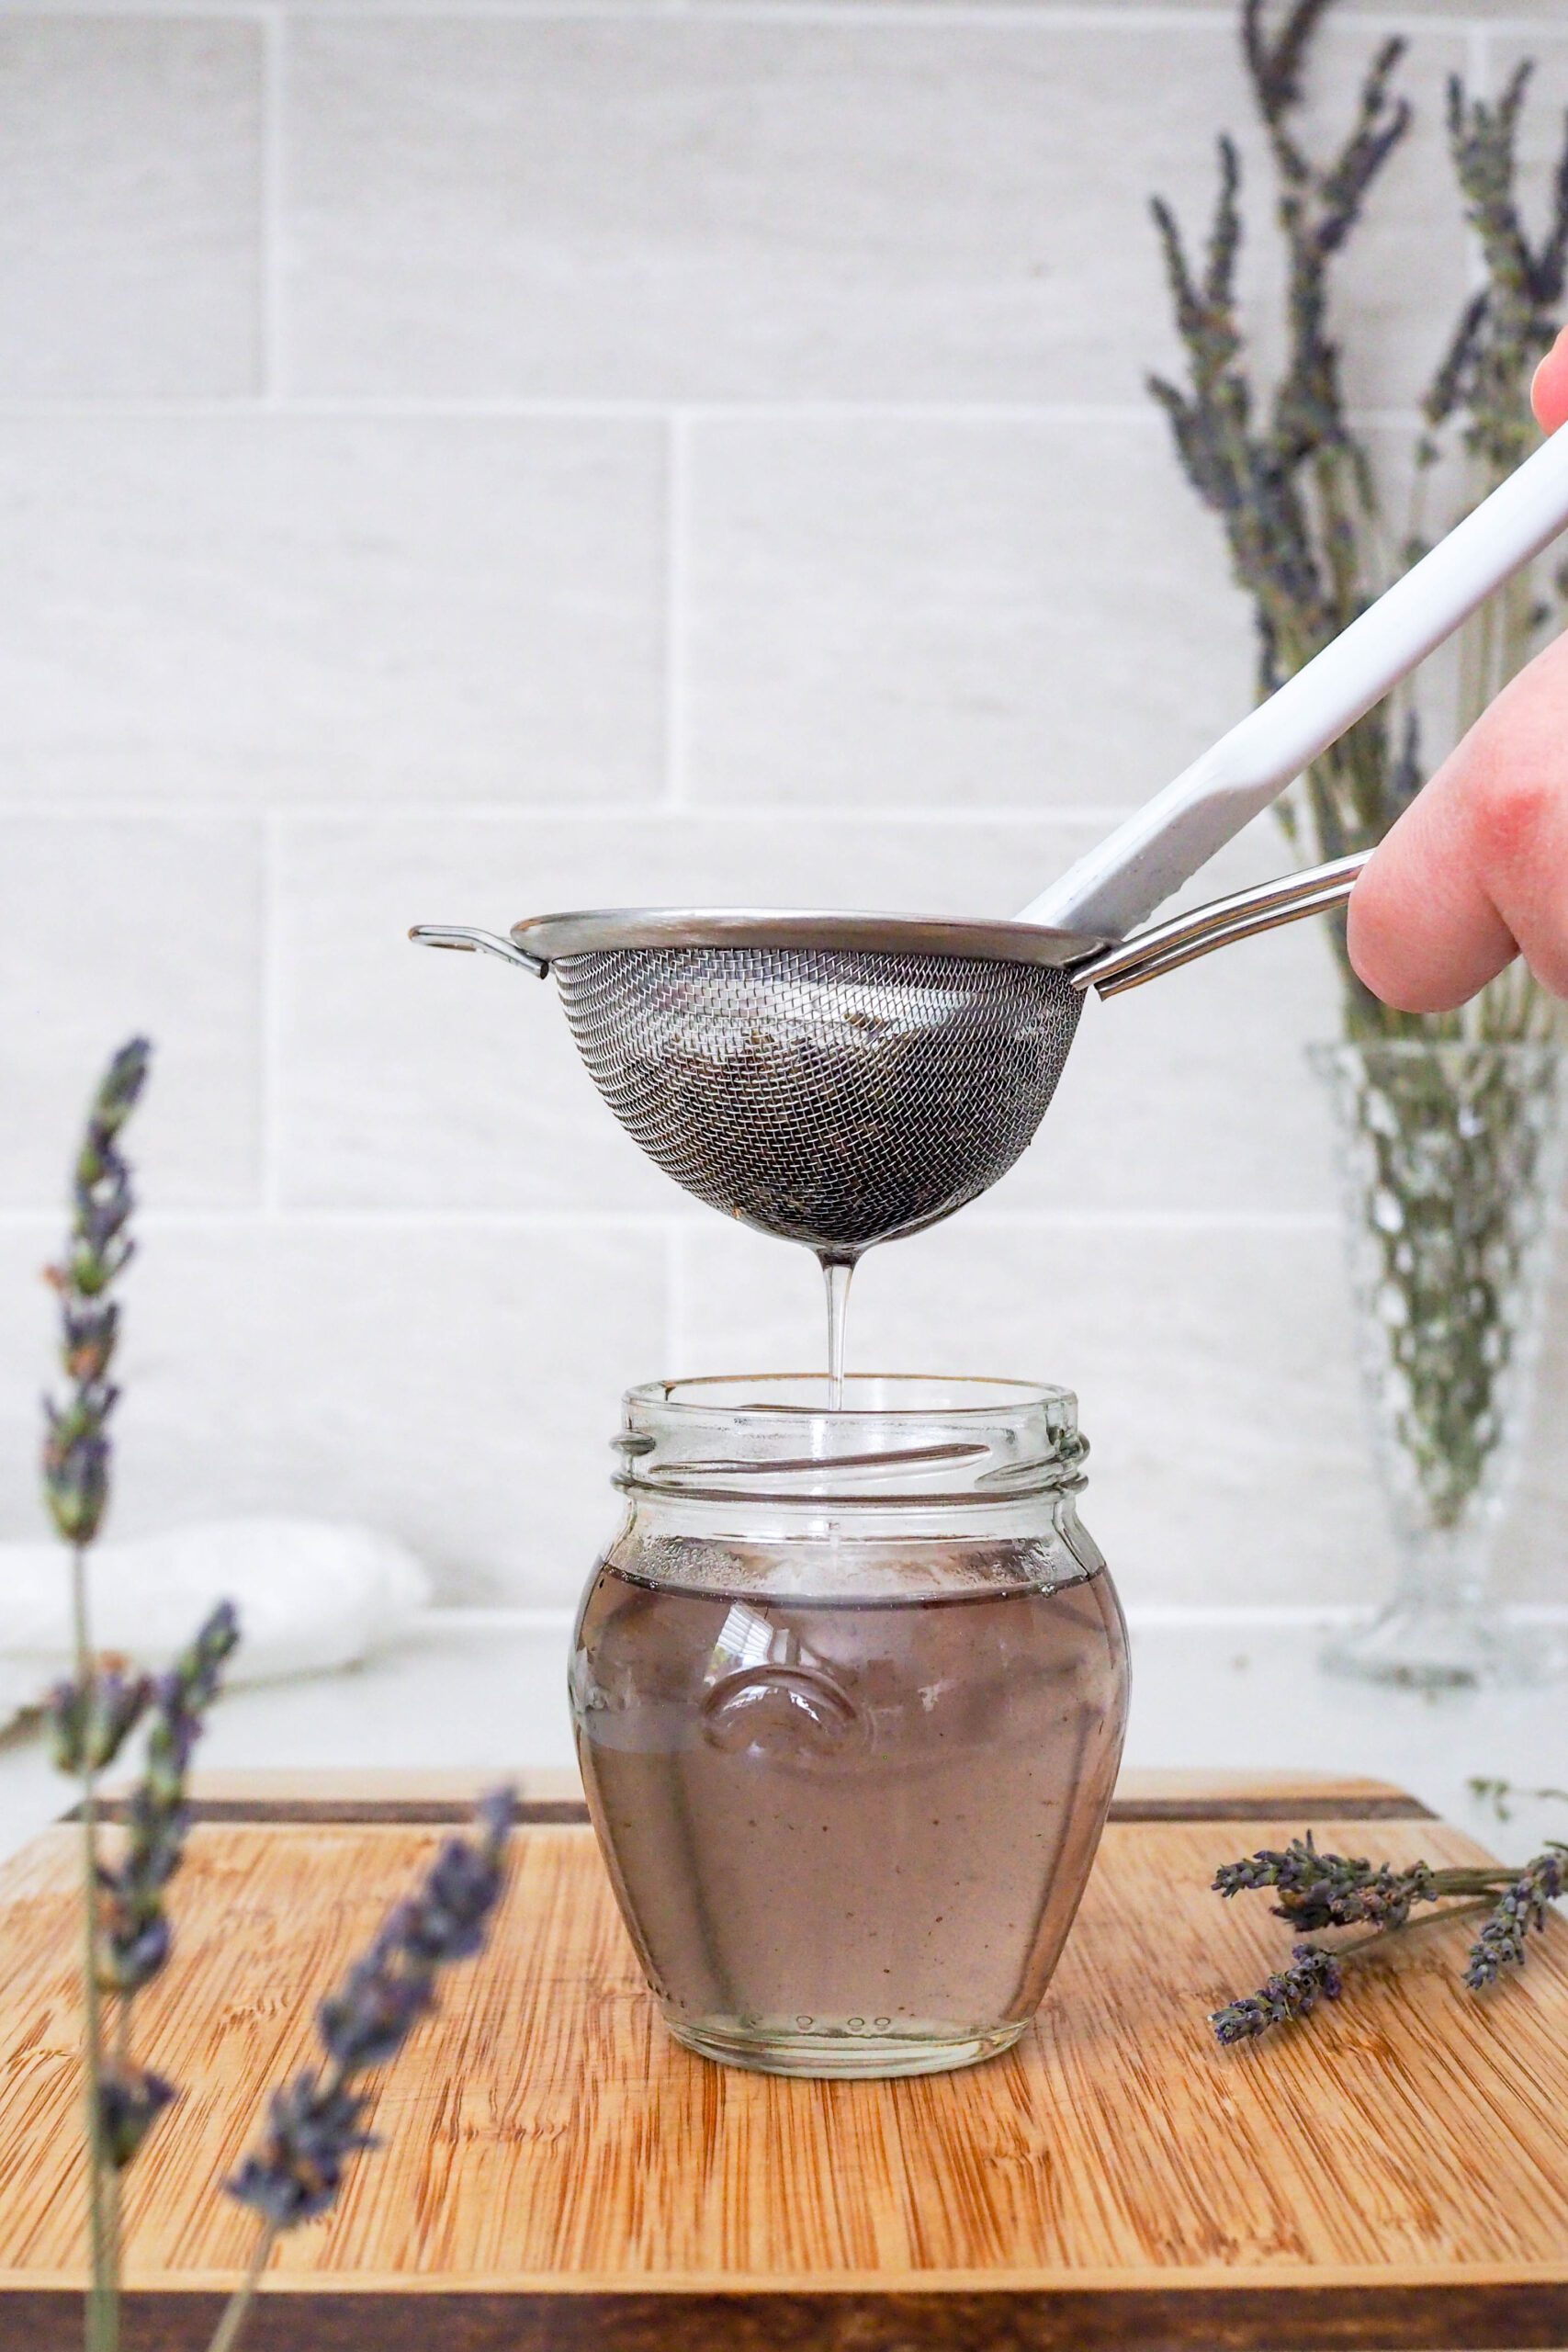 A spatula presses syrup out of lavender buds in a strainer over a jar.